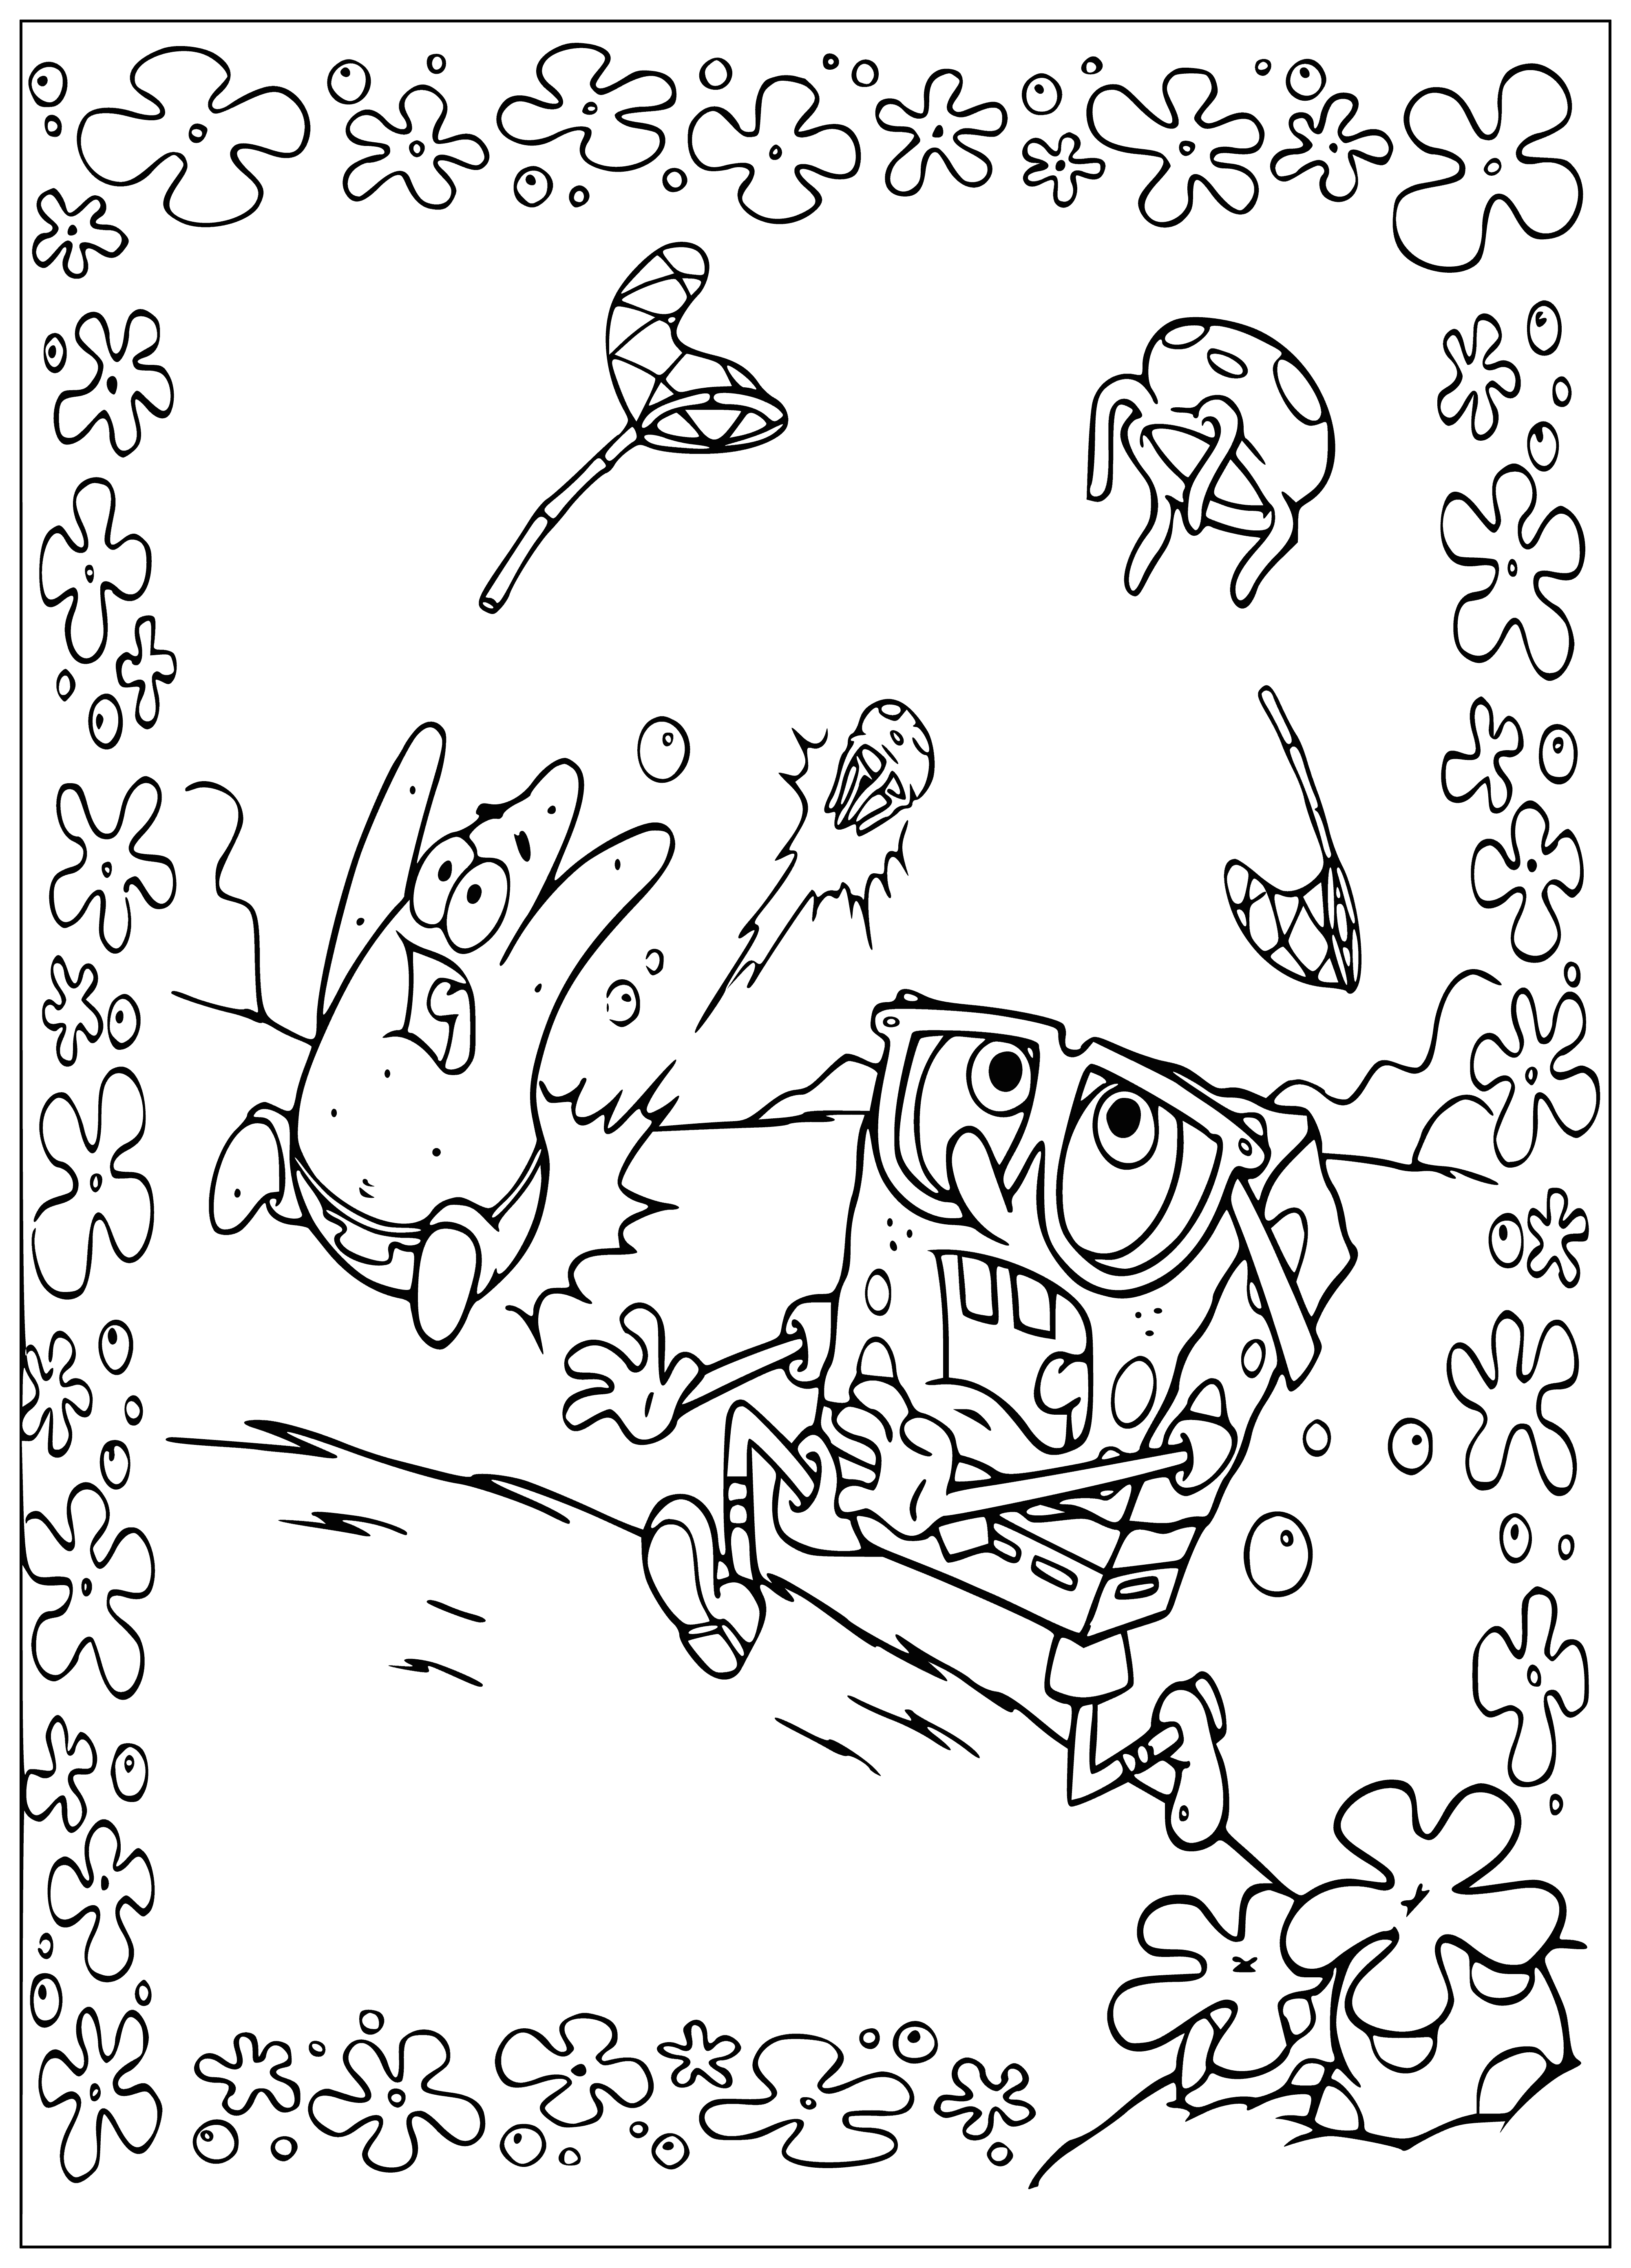 Jellyfish attack coloring page